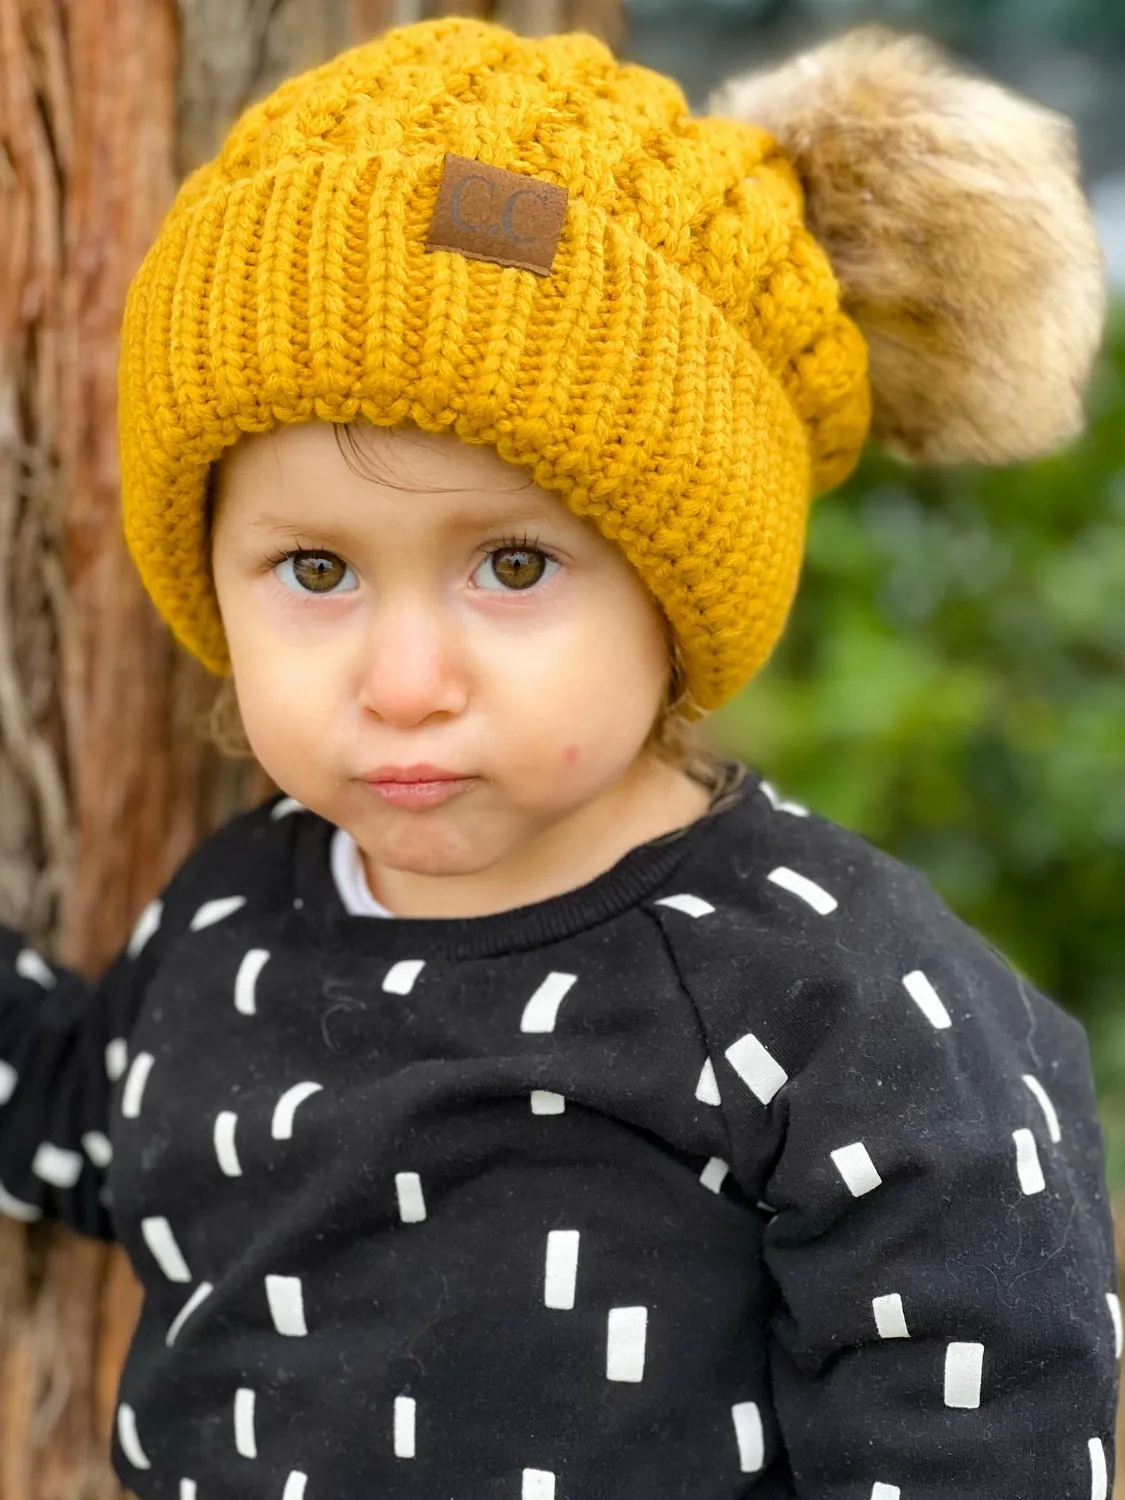 Toddler fiercely looking at camera with a beautiful yellow beanie with puffy ears